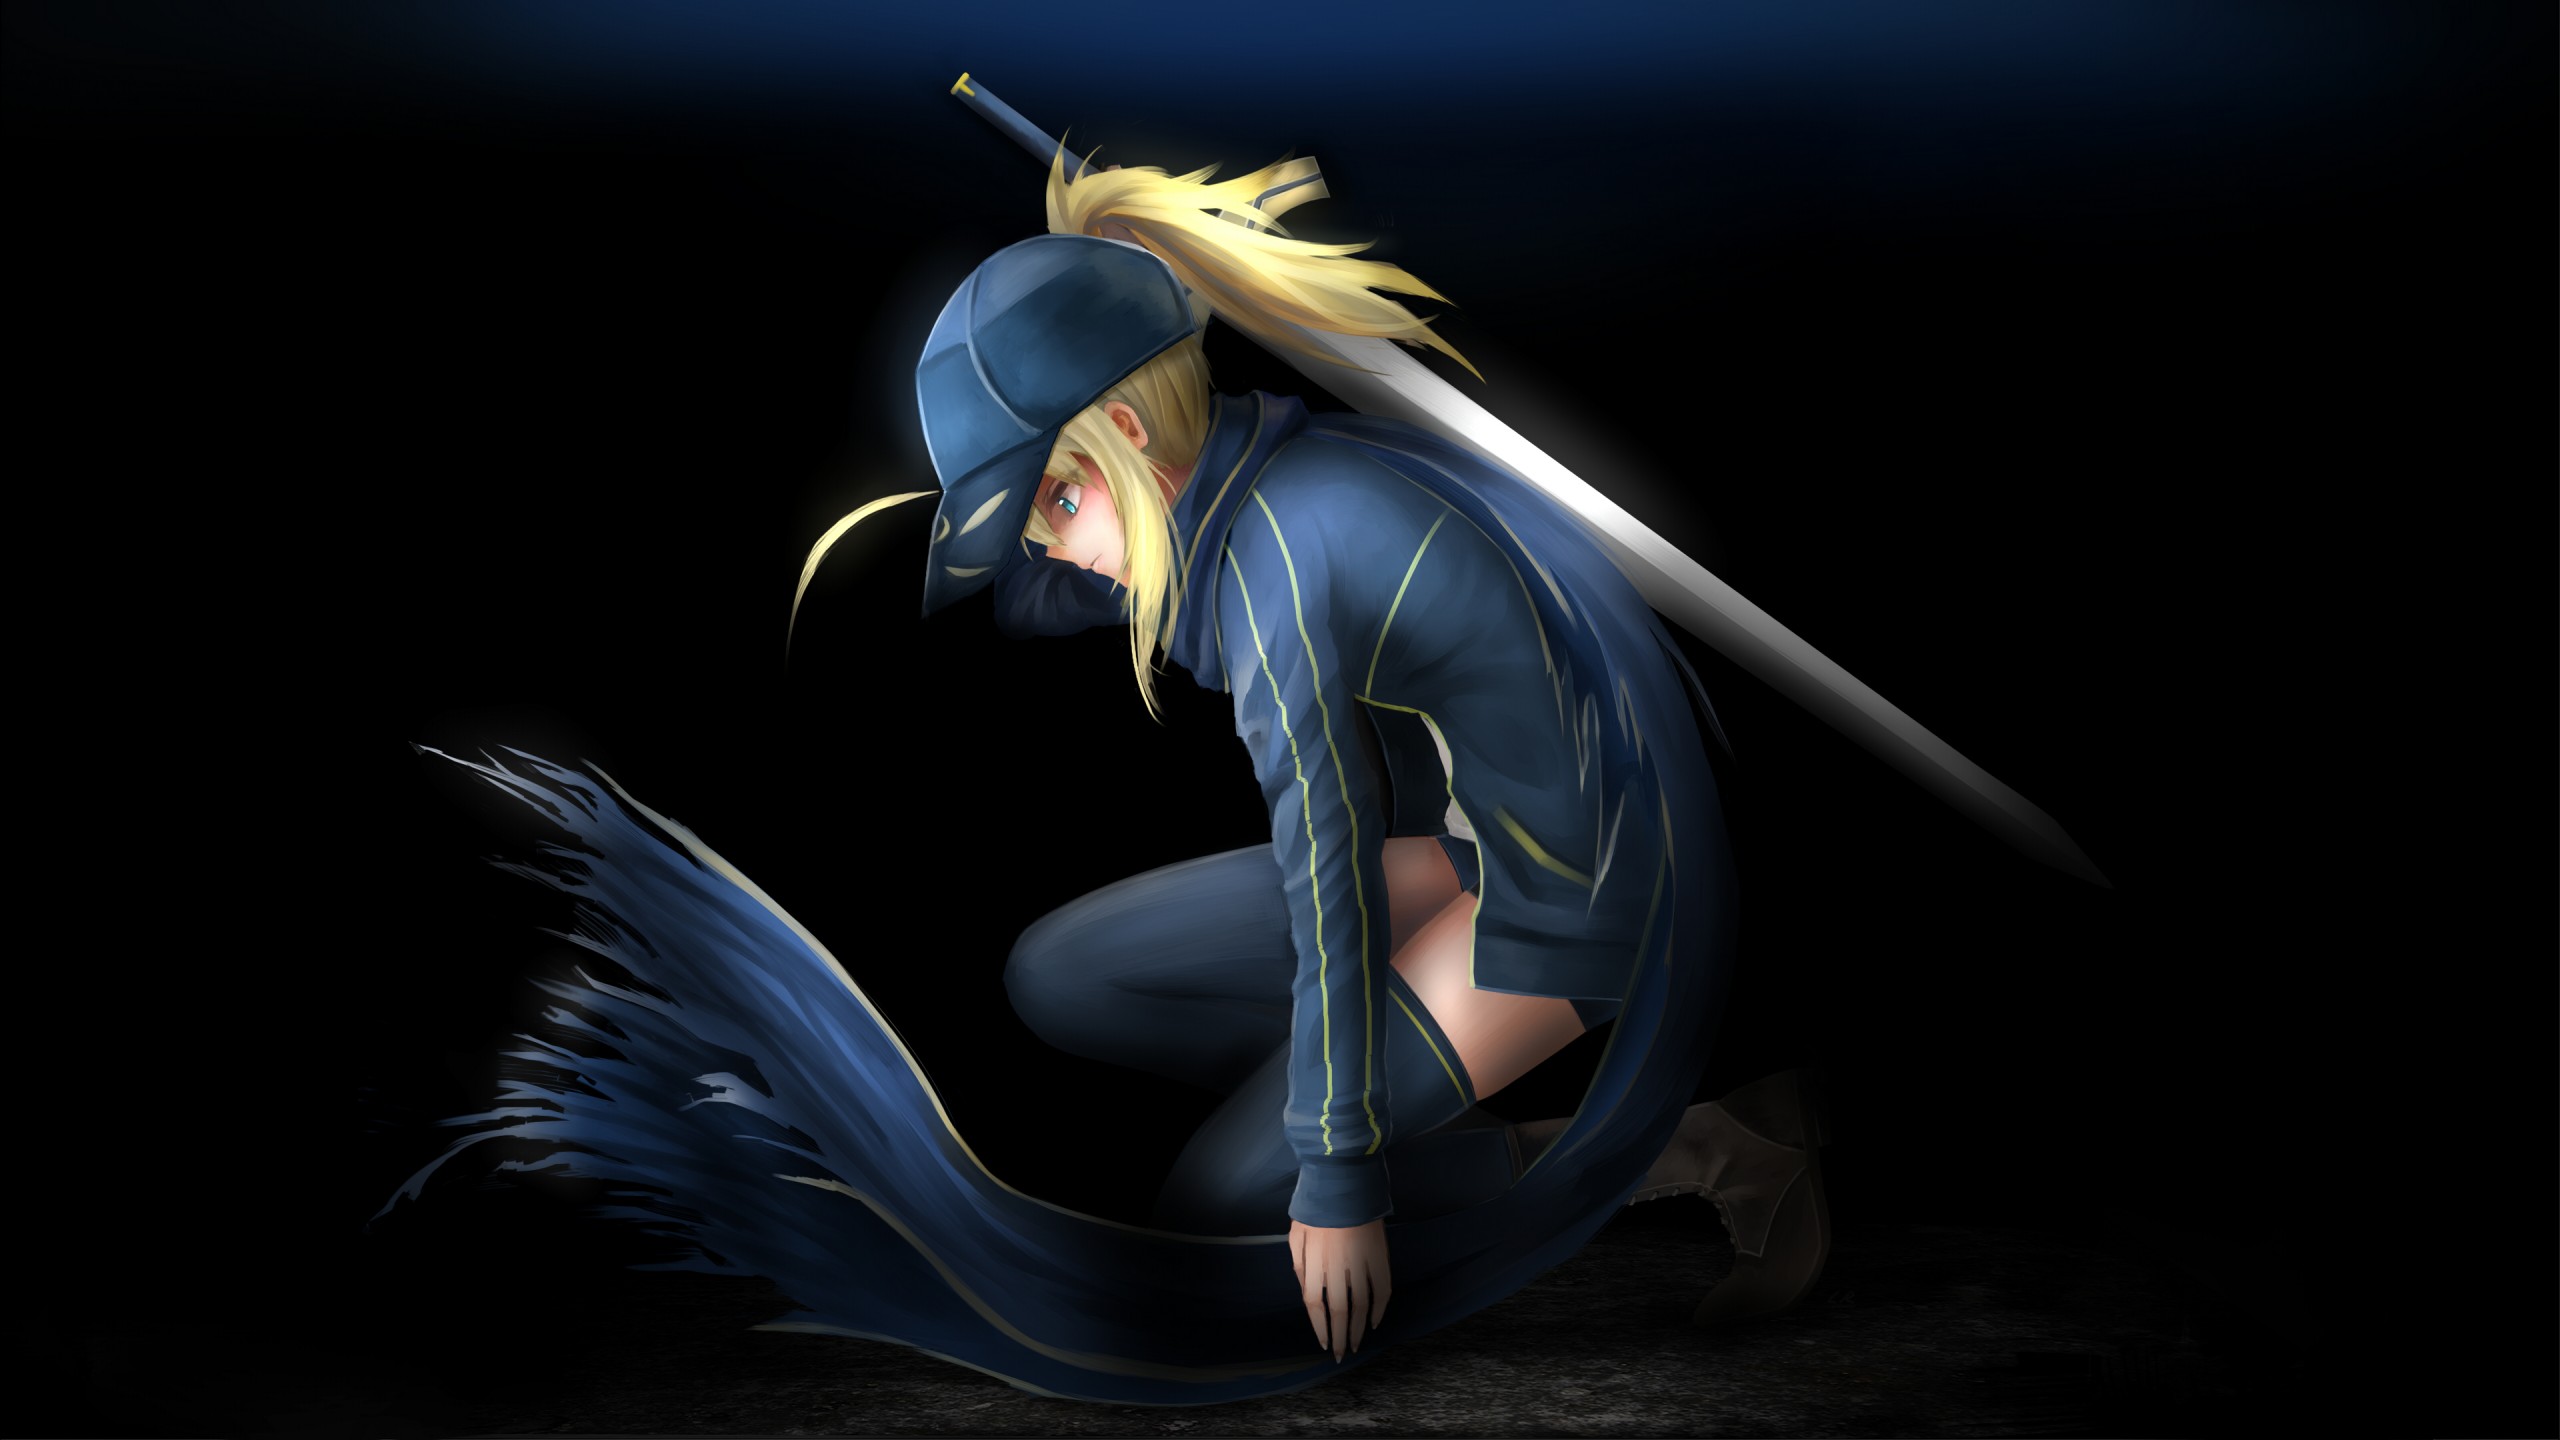 fate stay night saber wallpaper,cg artwork,darkness,anime,fictional character,illustration